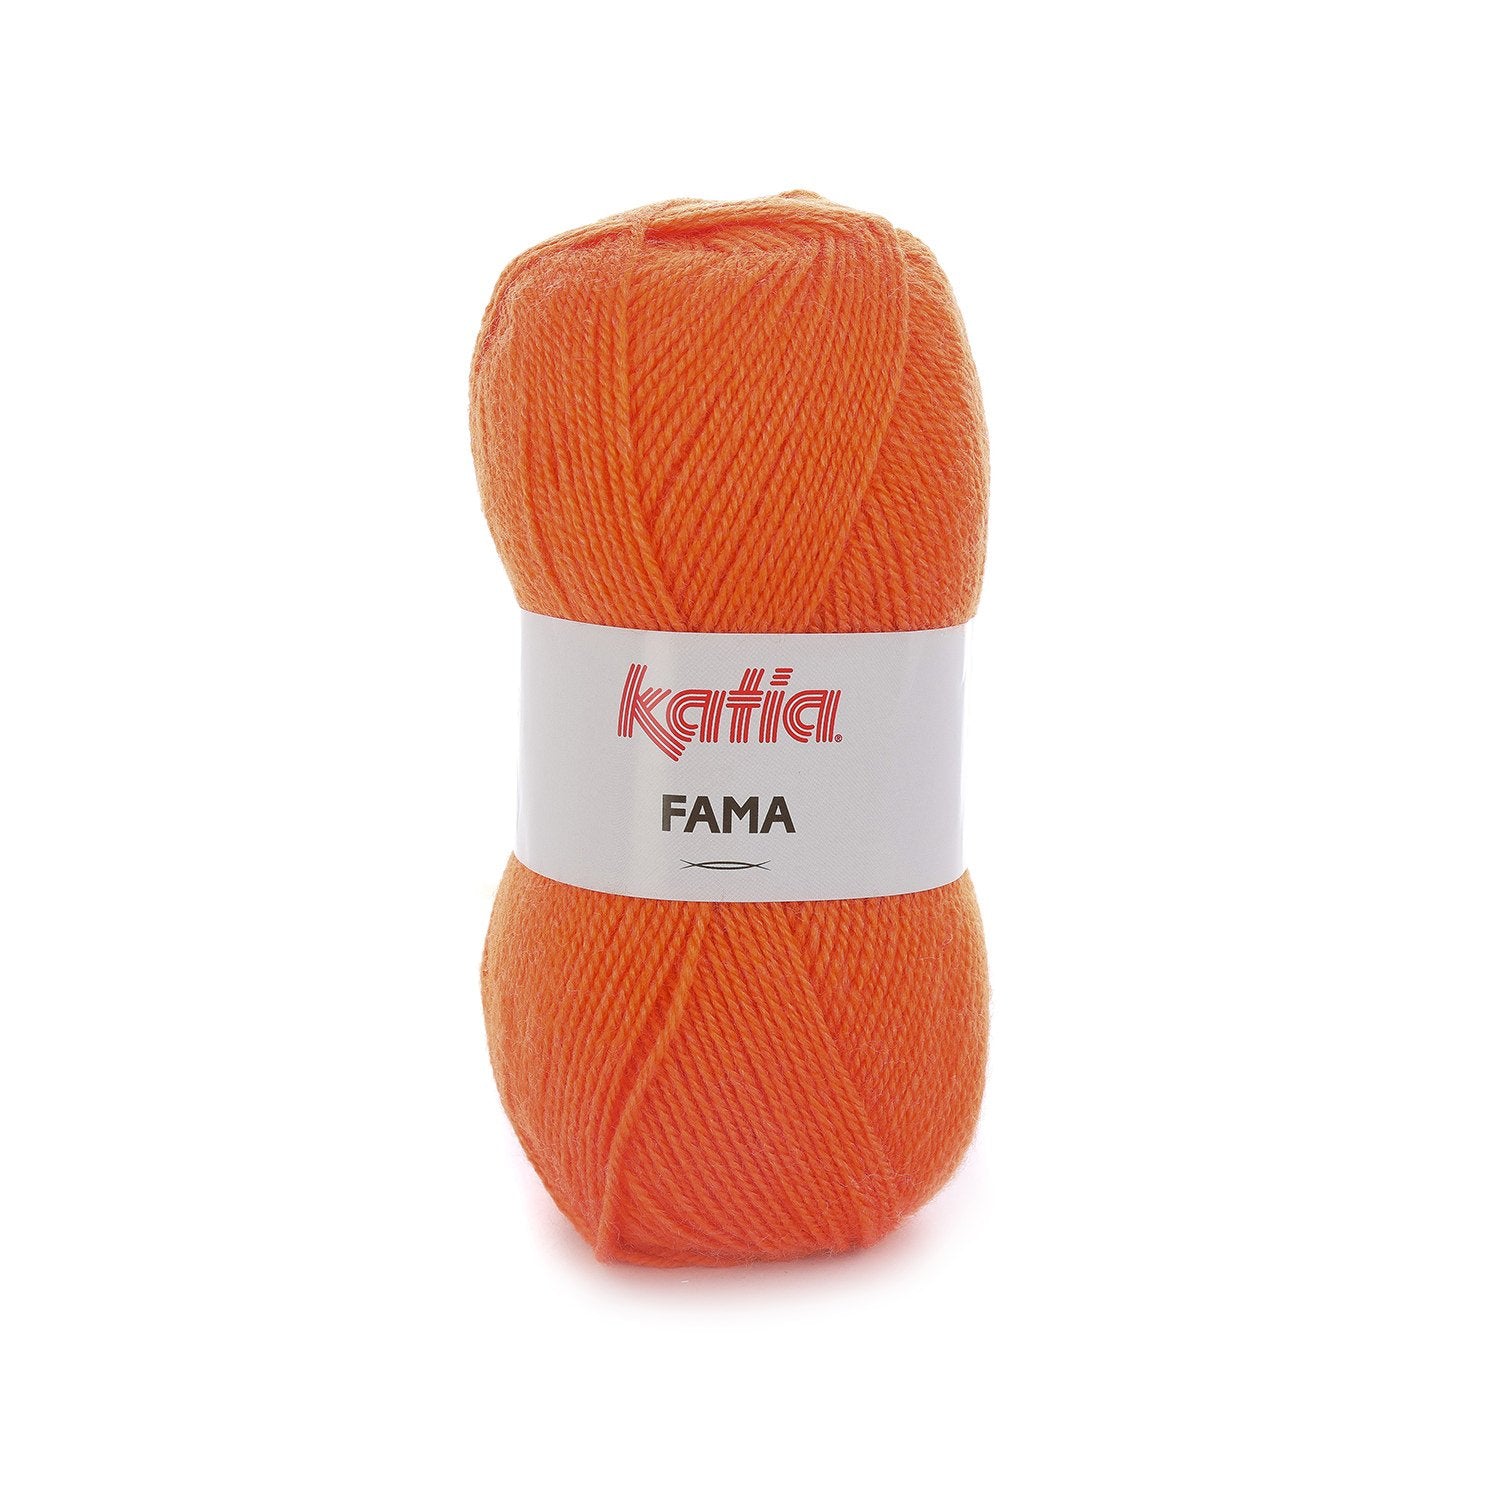 Katia FAMA: 100% acrylic, a wide variety of colors for your work